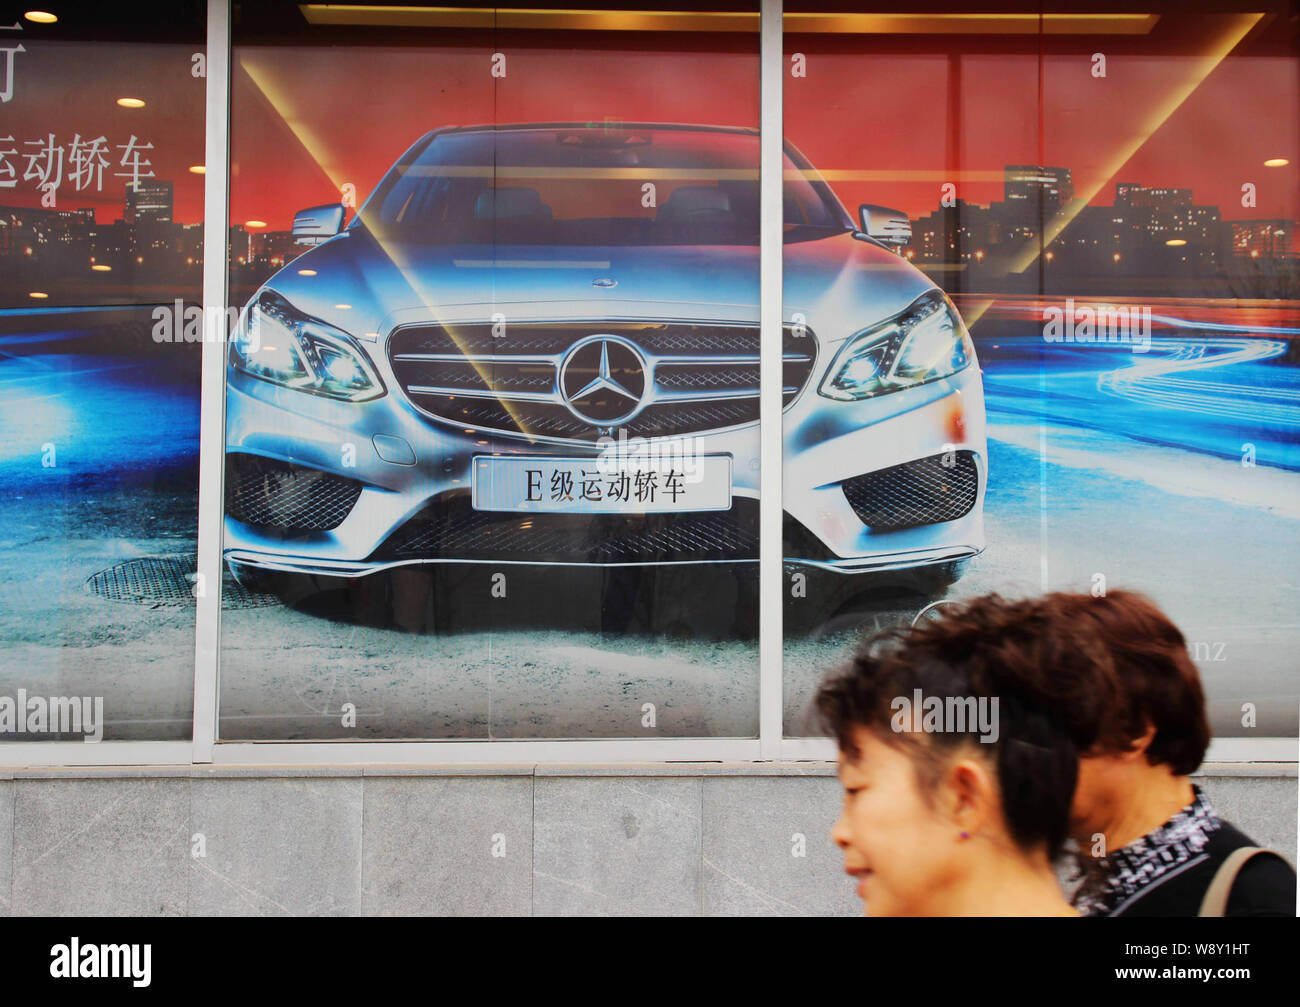 --FILE--Pedestrians walk past an advertisement for Mercedes-Benz E-Class cars in Chongqing, China, 18 November 2013.   Mercedes-Benz may be one of the Stock Photo